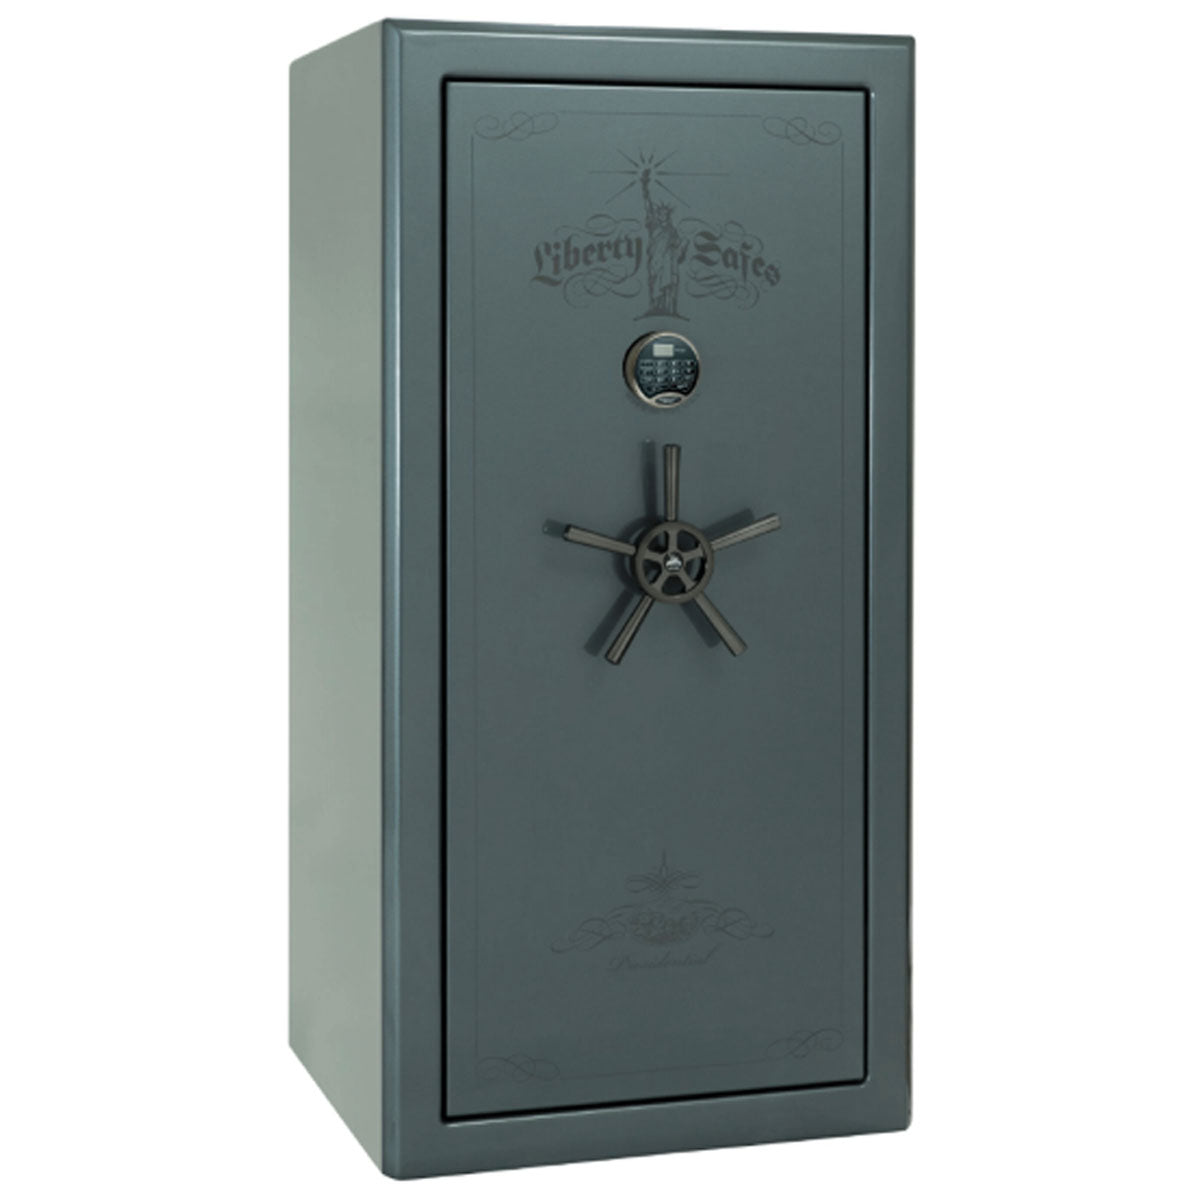 Liberty Safe Presidential 25 in Forest Mist Gloss with Black Chrome Electronic Lock, closed door.